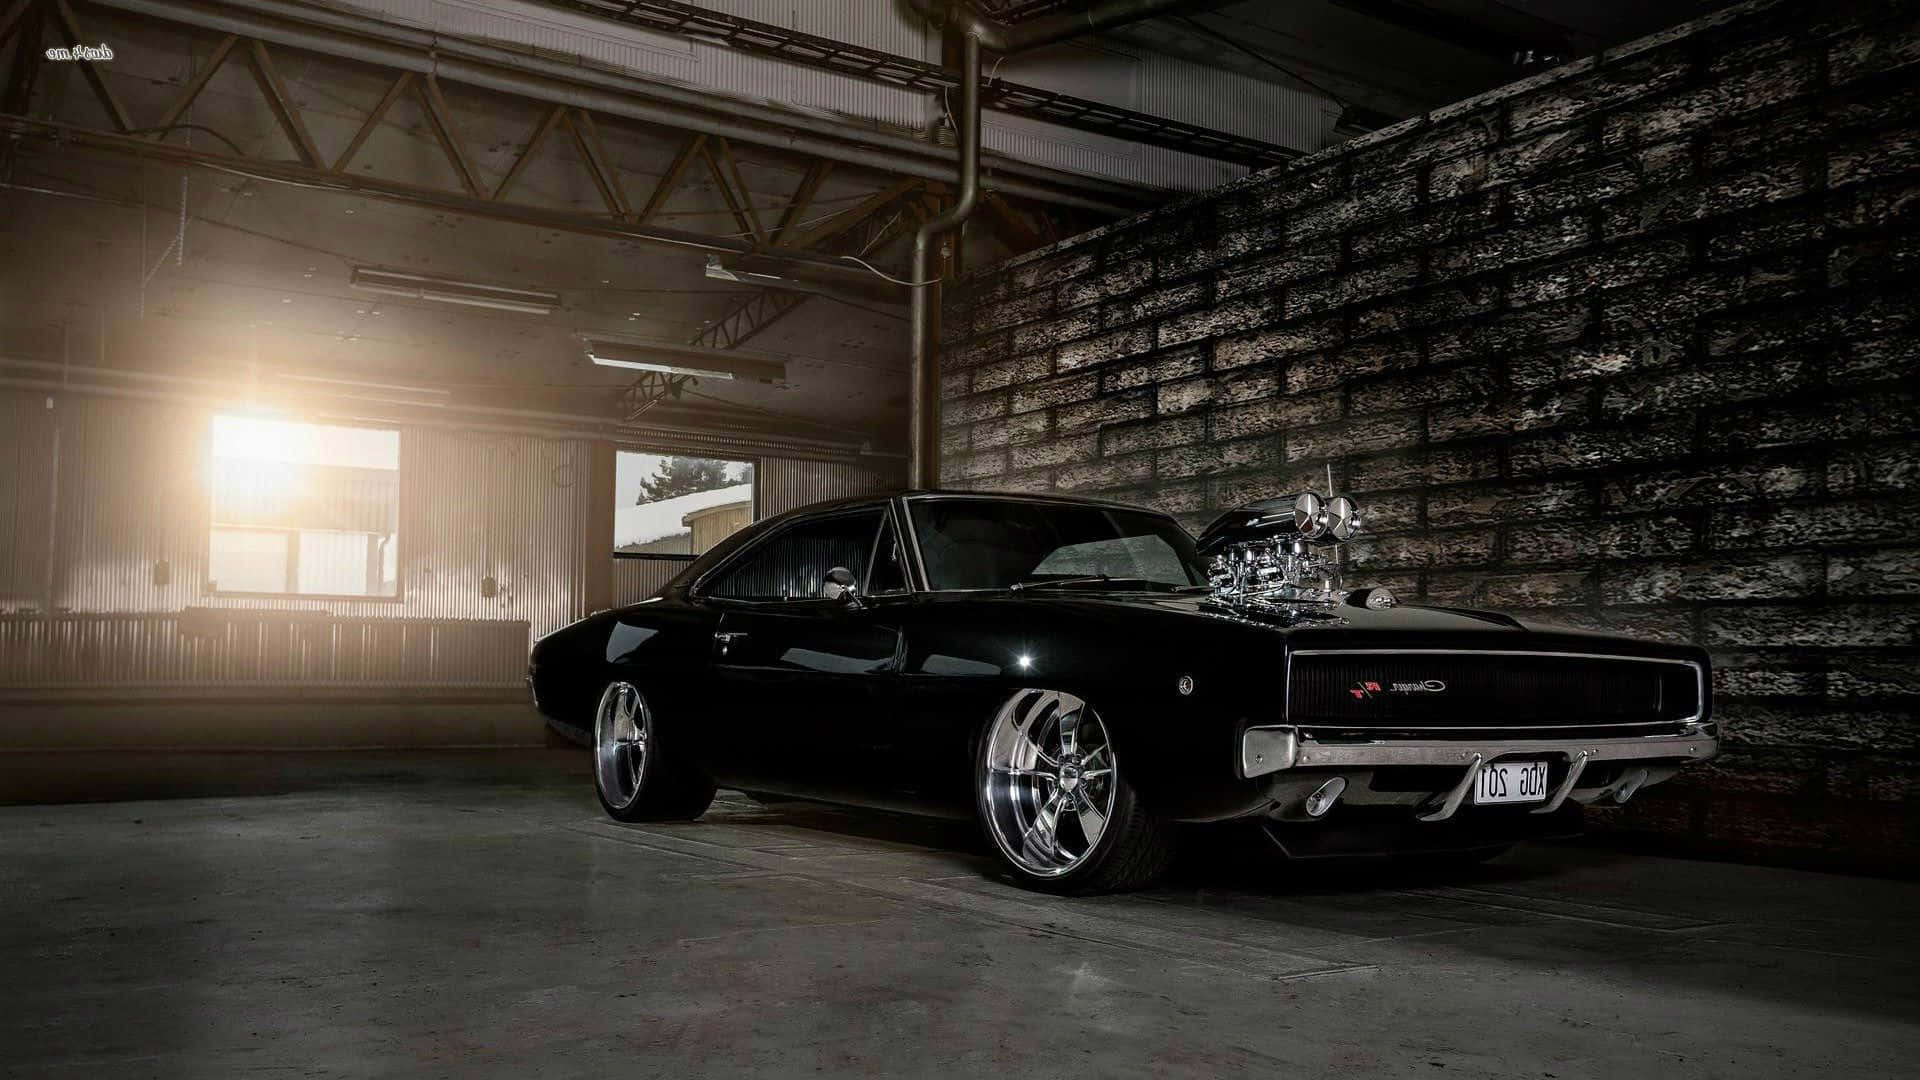 Iconic Dodge Charger cruising on the road Wallpaper